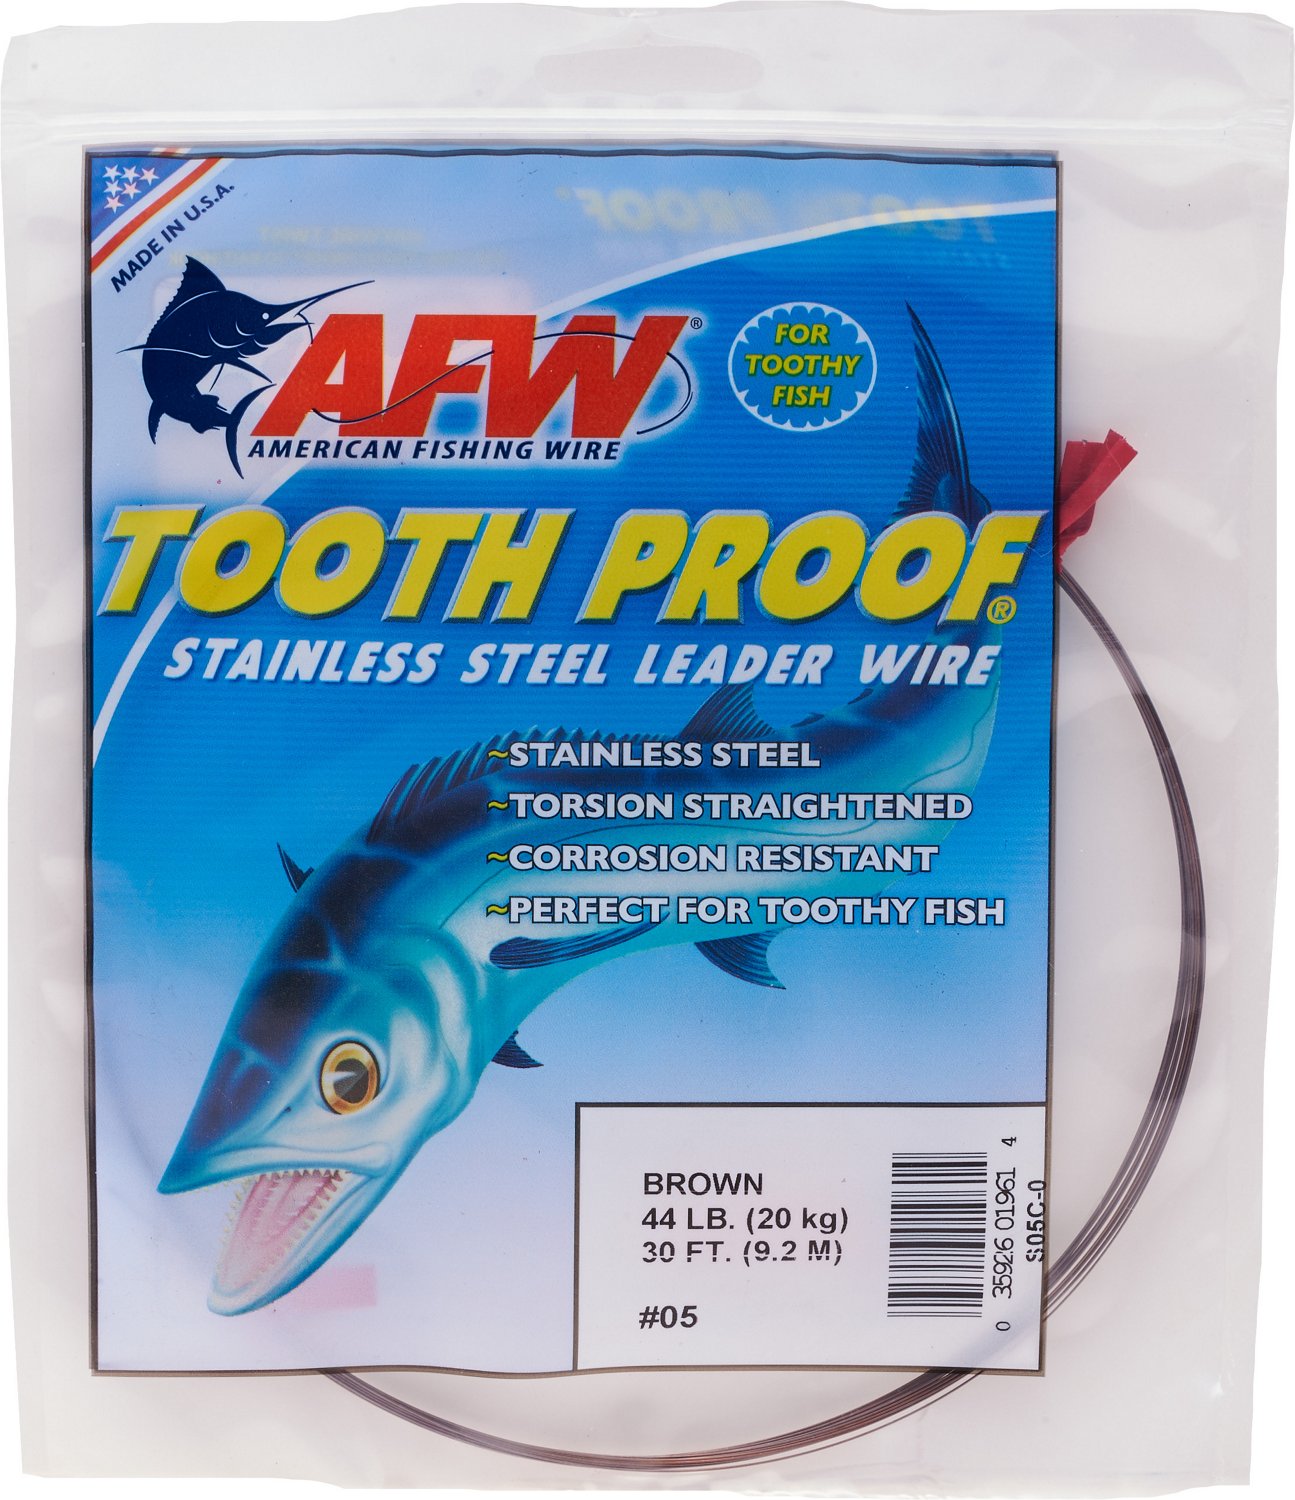 American Fishing Wire Tooth Proof 44 lbs - 30 ft Single-Strand